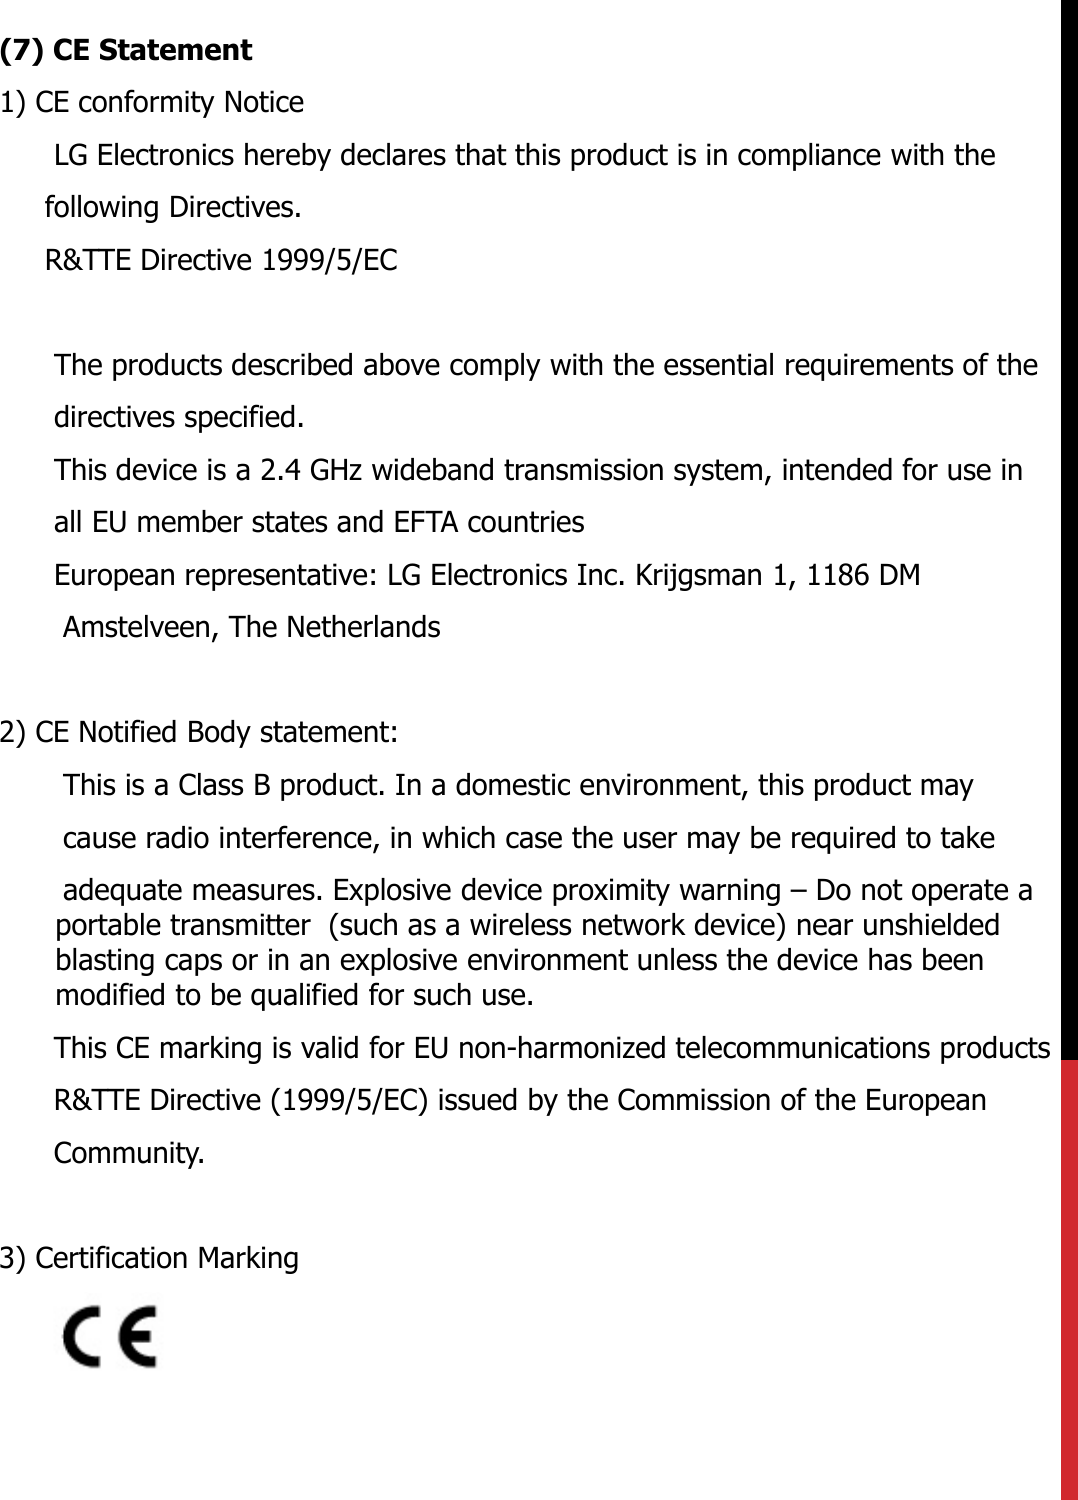 (7) CE Statement1) CE conformity NoticeLG Electronics hereby declares that this product is in compliance with thefollowing Directives.R&amp;TTE Directive 1999/5/EC The products described above comply with the essential requirements of the directives specified. This device is a 2.4 GHz wideband transmission system, intended for use in all EU member states and EFTA countriesEuropean representative: LG Electronics Inc. Krijgsman 1, 1186 DM Amstelveen, The Netherlands 2) CE Notified Body statement:This is a Class B product. In a domestic environment, this product may cause radio interference, in which case the user may be required to take adequate measures. Explosive device proximity warning – Do not operate a portable transmitter  (such as a wireless network device) near unshielded blasting caps or in an explosive environment unless the device has been modified to be qualified for such use.This CE marking is valid for EU non-harmonized telecommunications products R&amp;TTE Directive (1999/5/EC) issued by the Commission of the European Community.3) Certification Marking